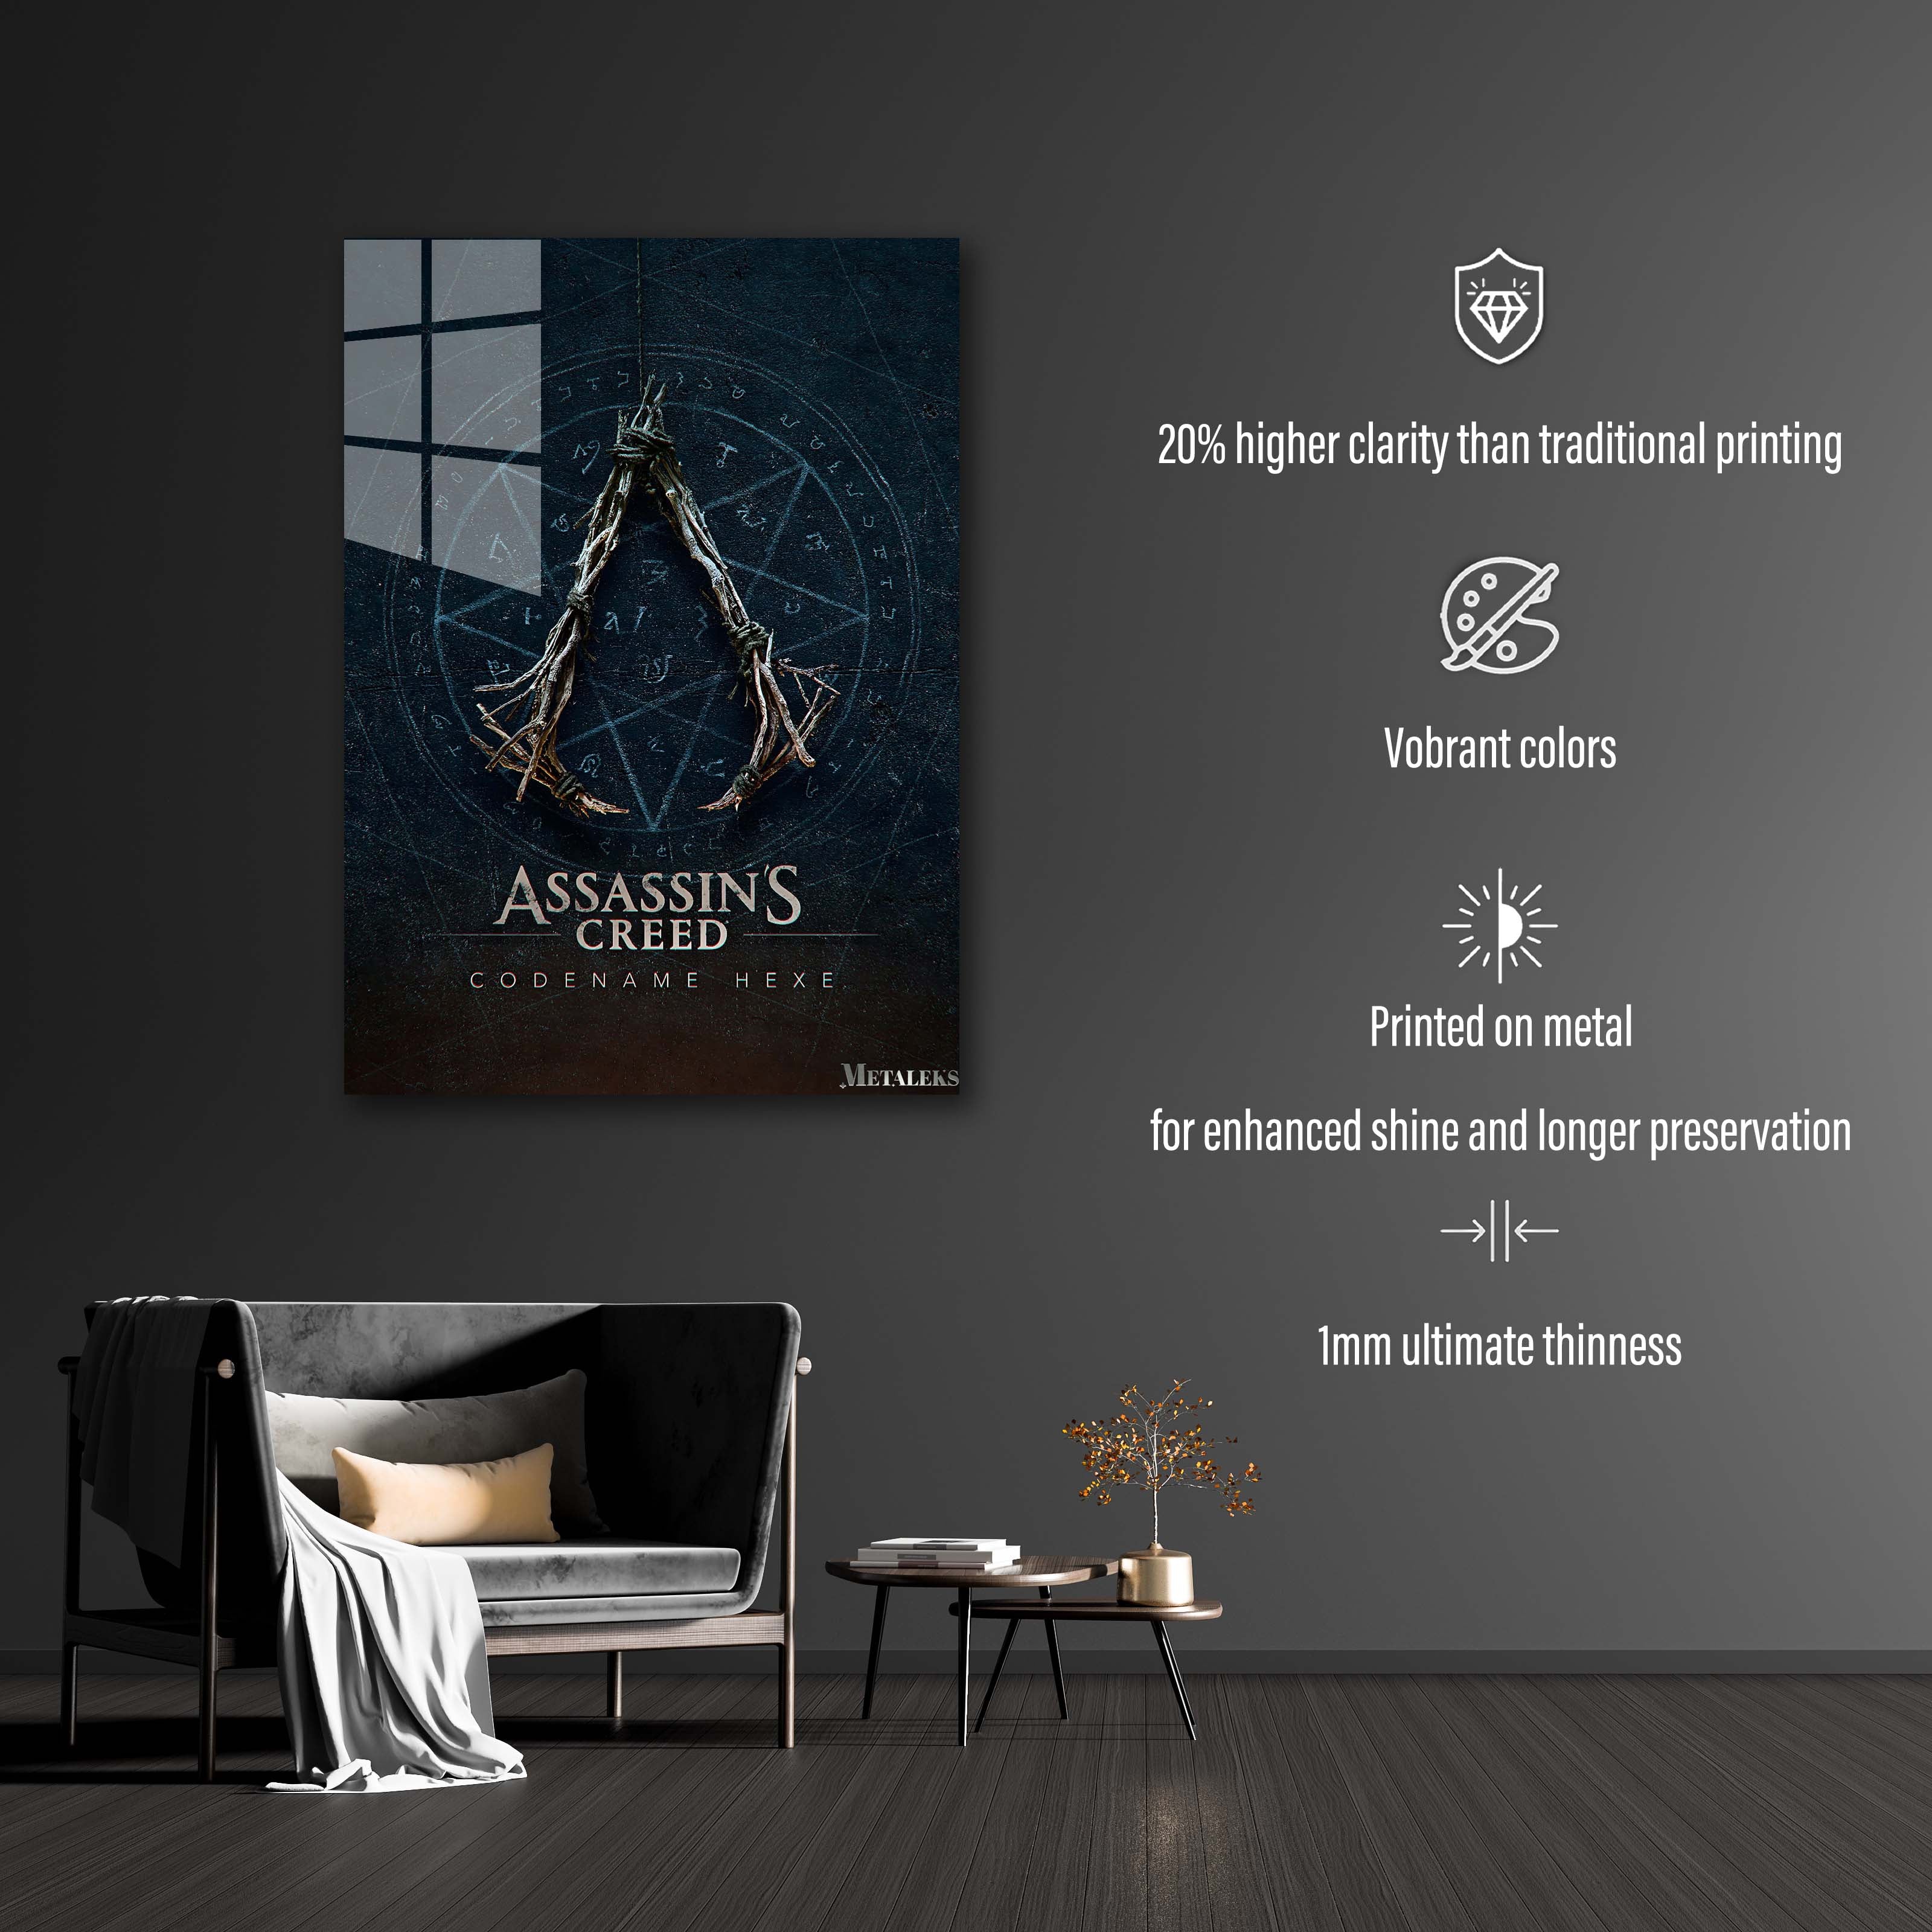 Assassins Creed Hexe-designed by @Akflamme